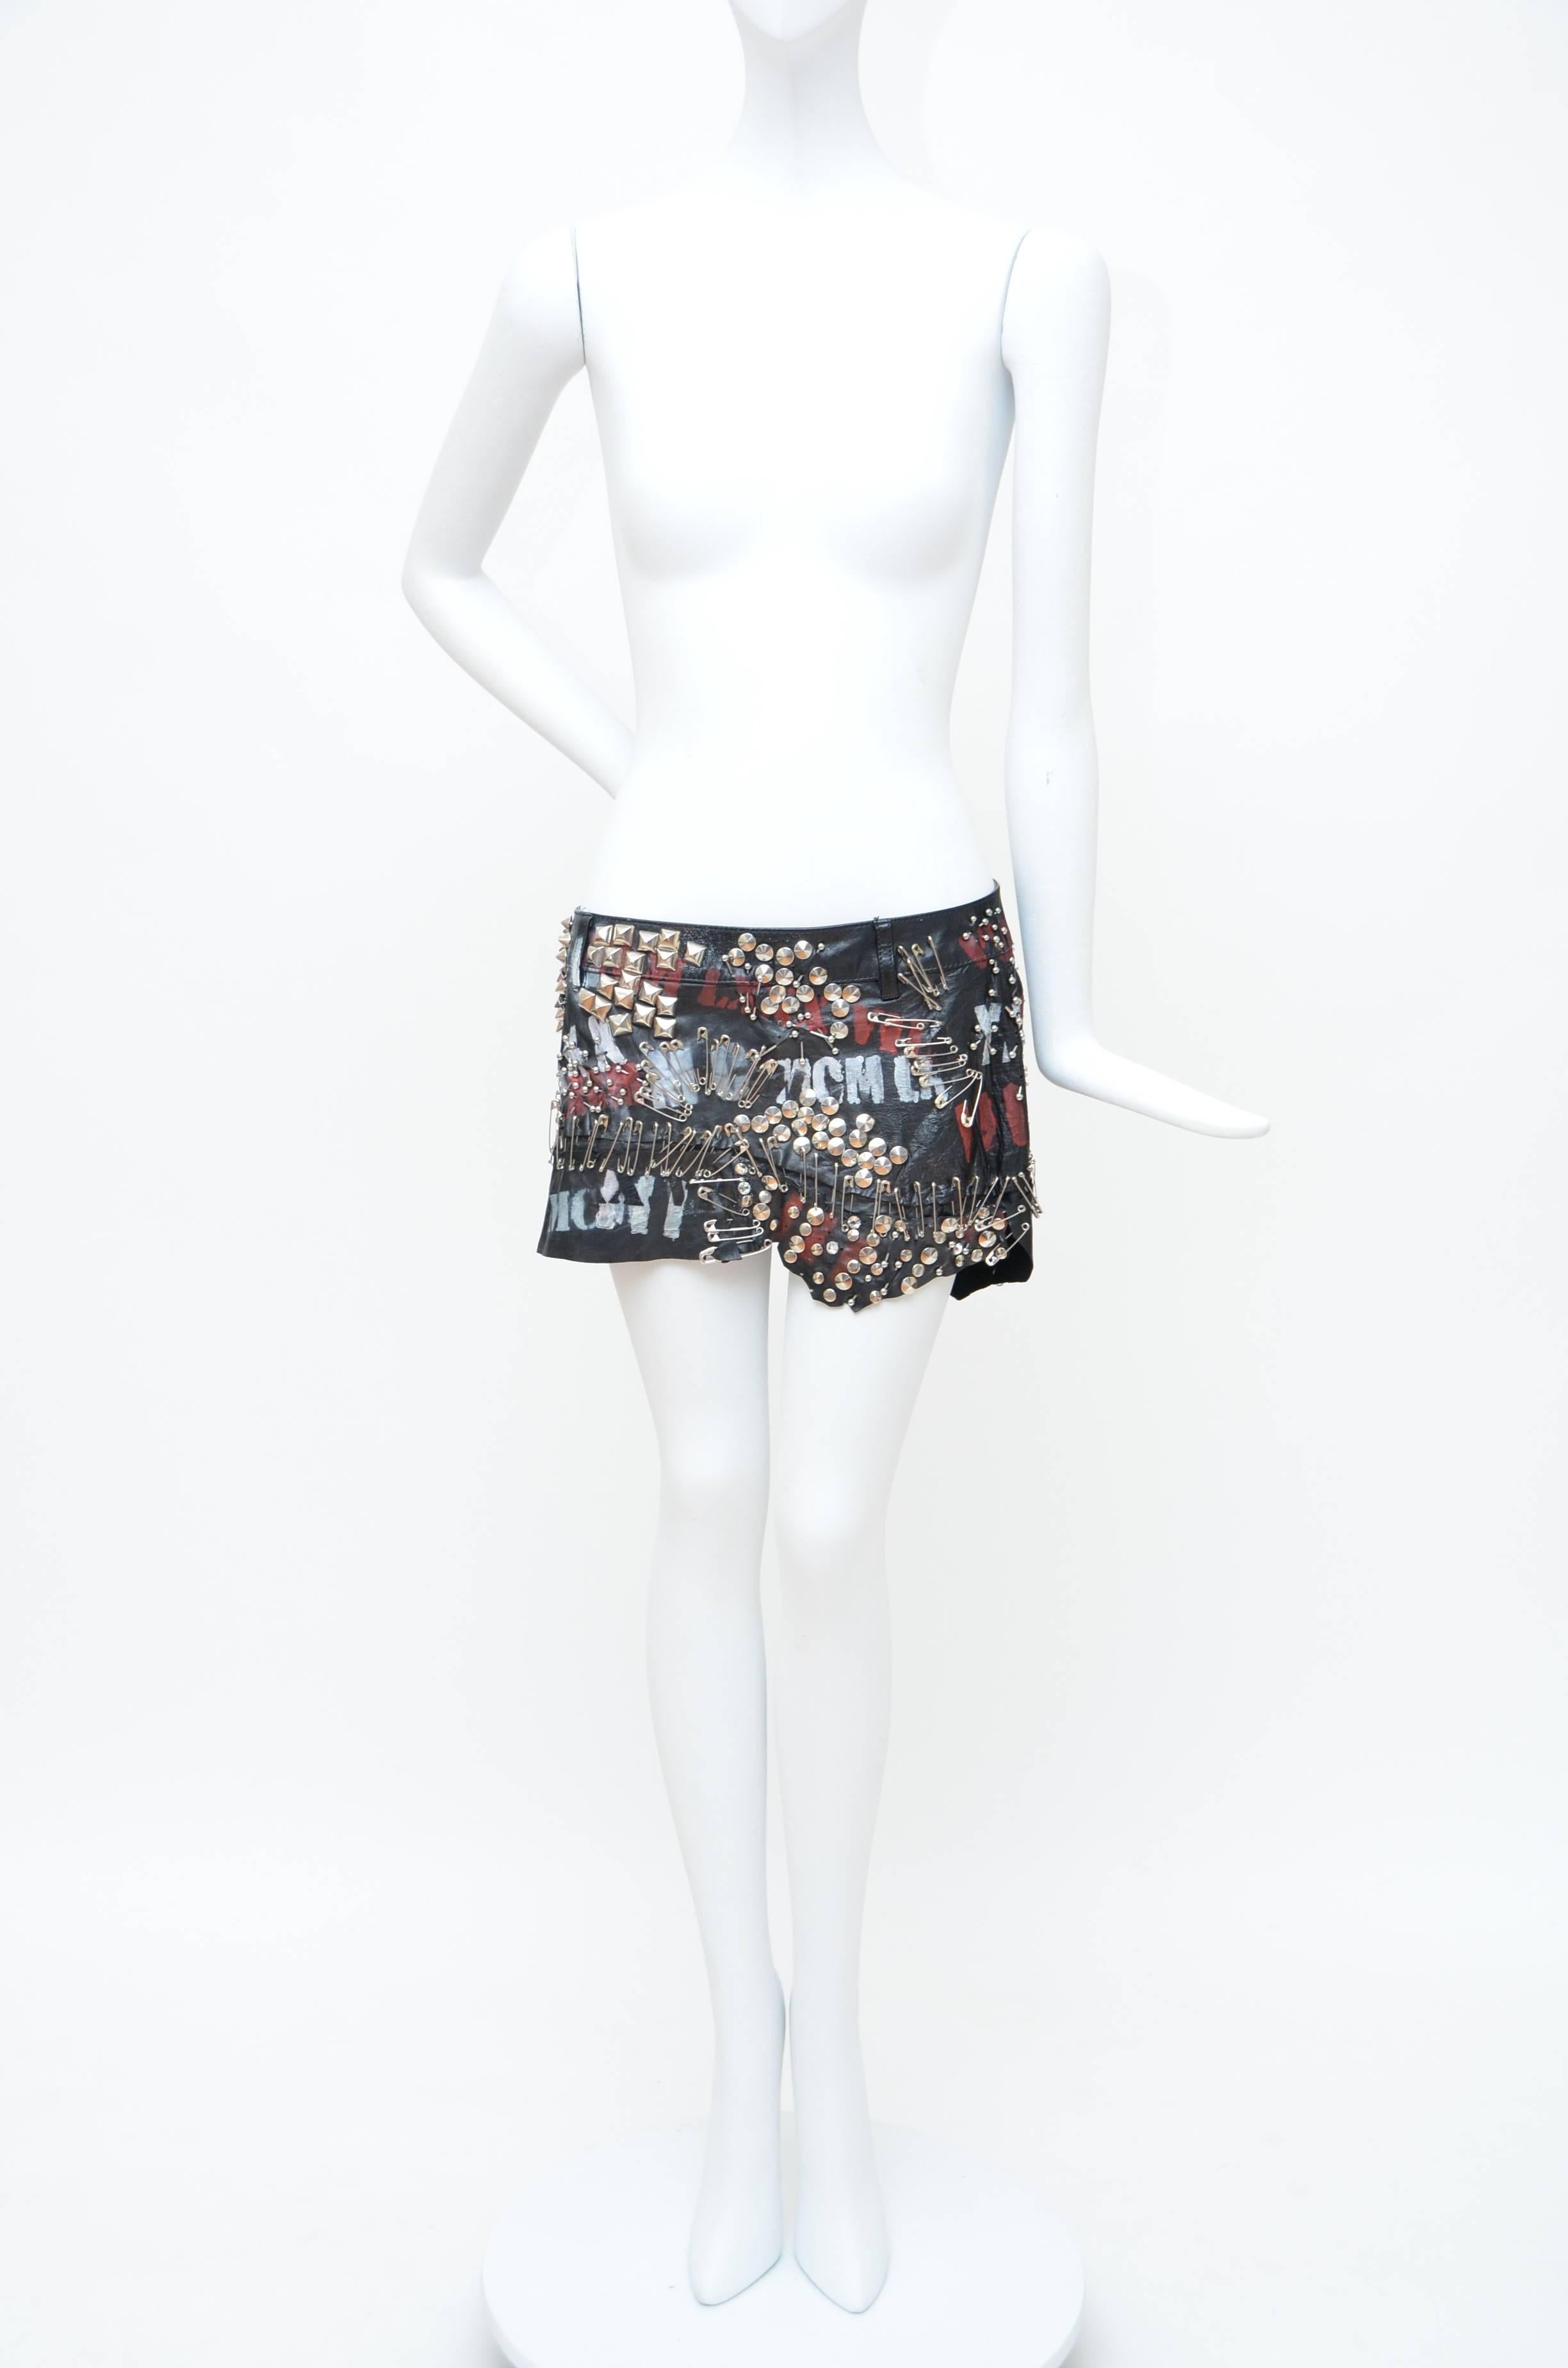 Rare Balmain 2011 Christophe Decarnin Runway Leather Embellished Skirt 34 In Excellent Condition In New York, NY